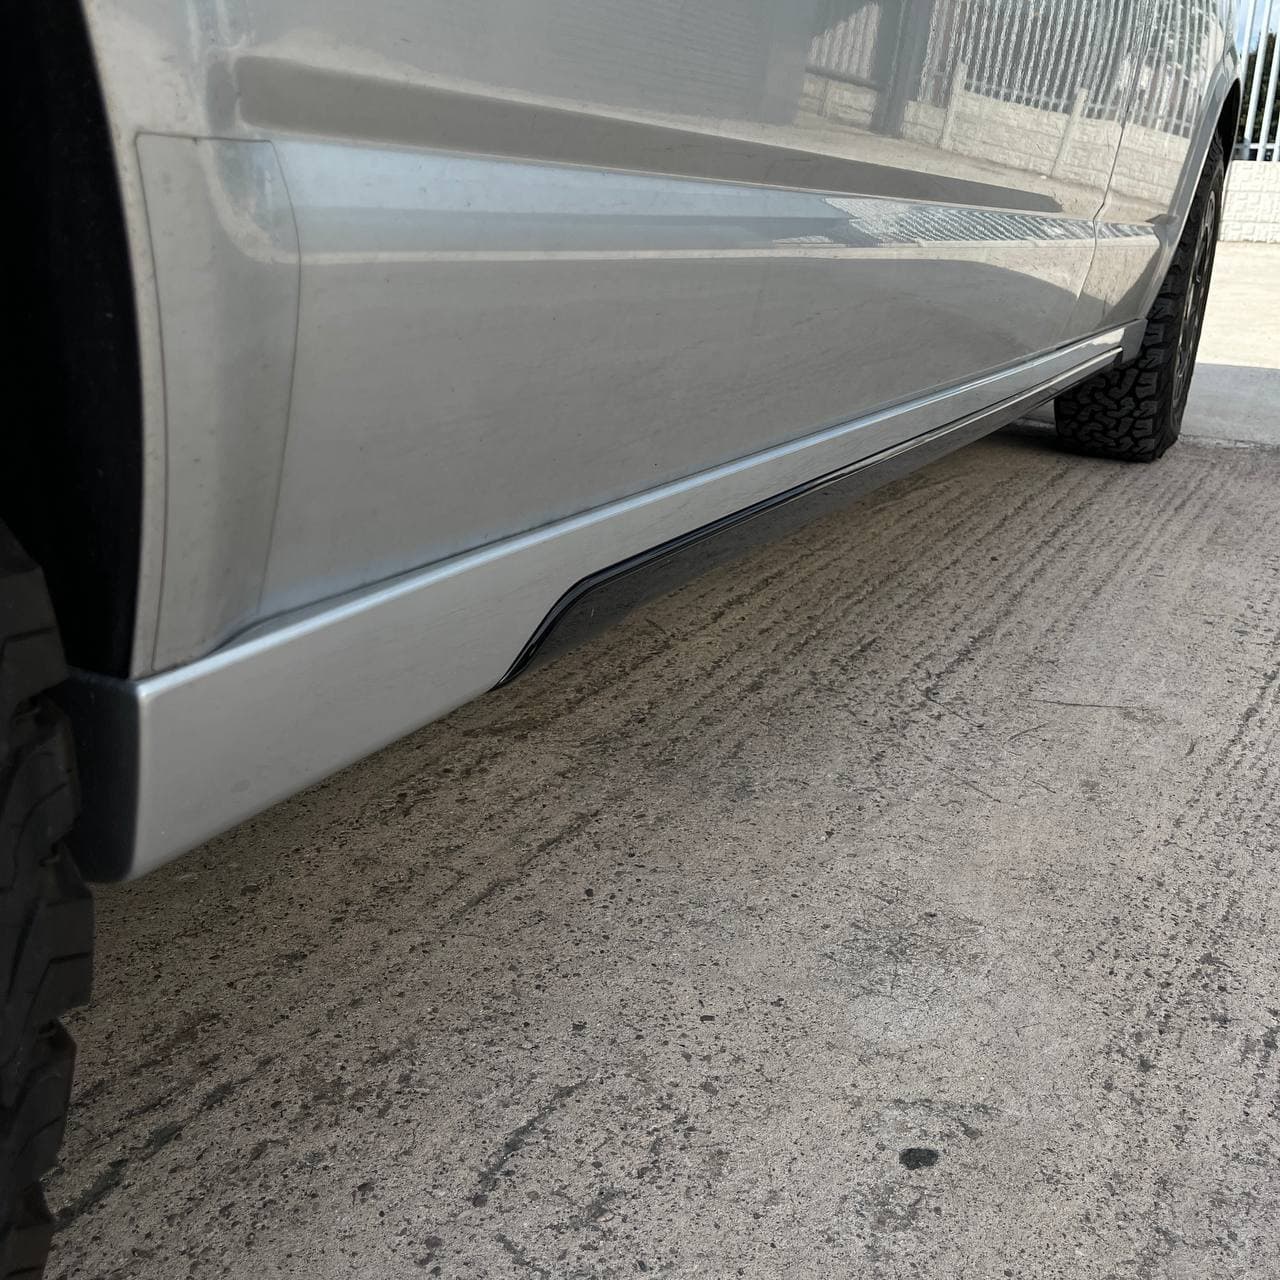 VW T6 Transporter Long wheel base Side skirts Painted Ready in  Reflex Silver, Painted and Ready to Fit ABS plastic